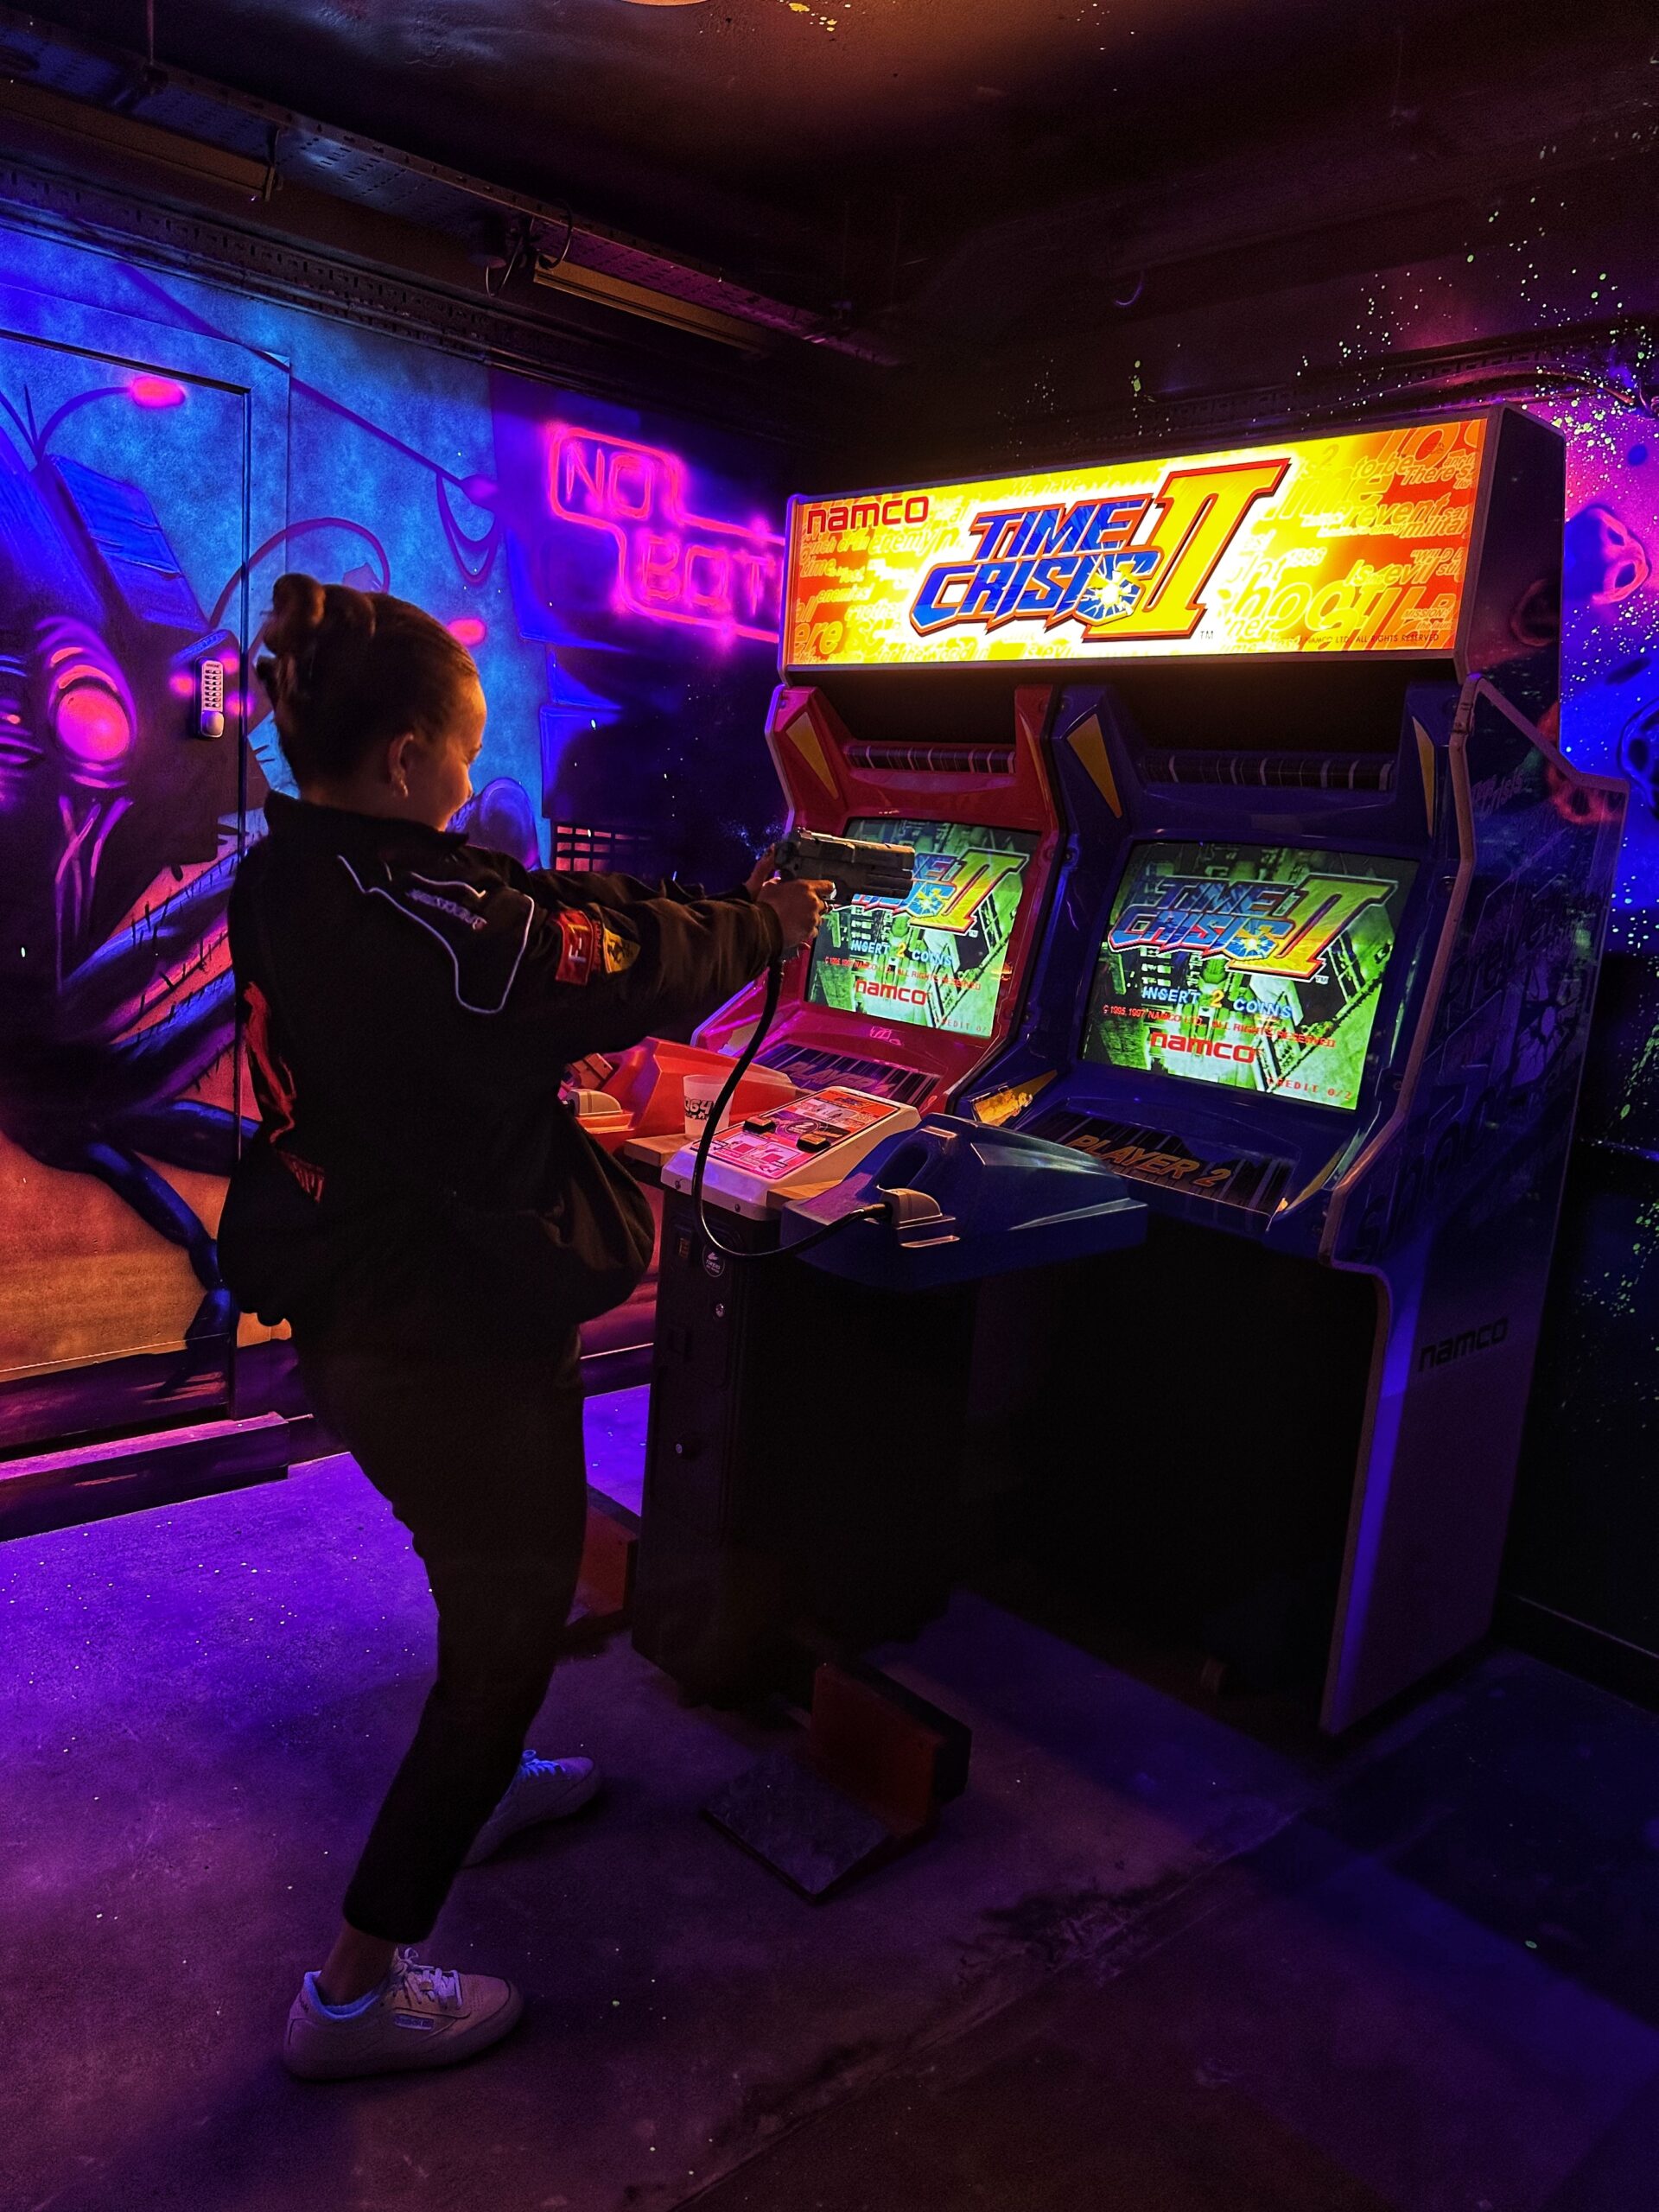 Arcade games at NQ64's new site in Manchester.